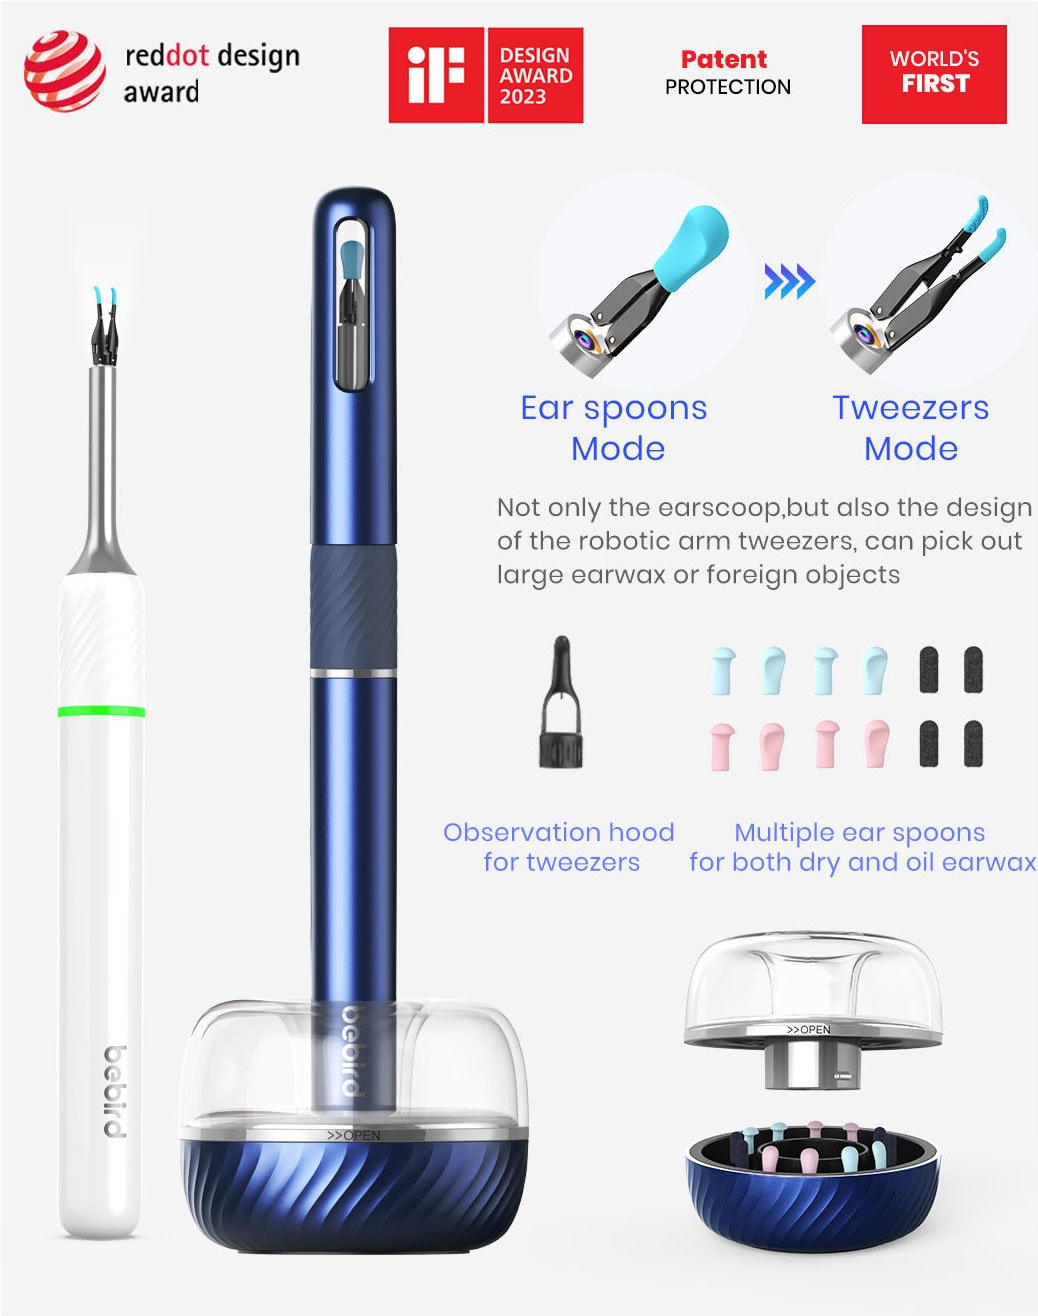 Note5 otoscope by EAR/BeBird product is sitting in it's stand. The tip is shown in ear spoons mode and tweezers mode. The stand is shown as a holder for alternate spoons.